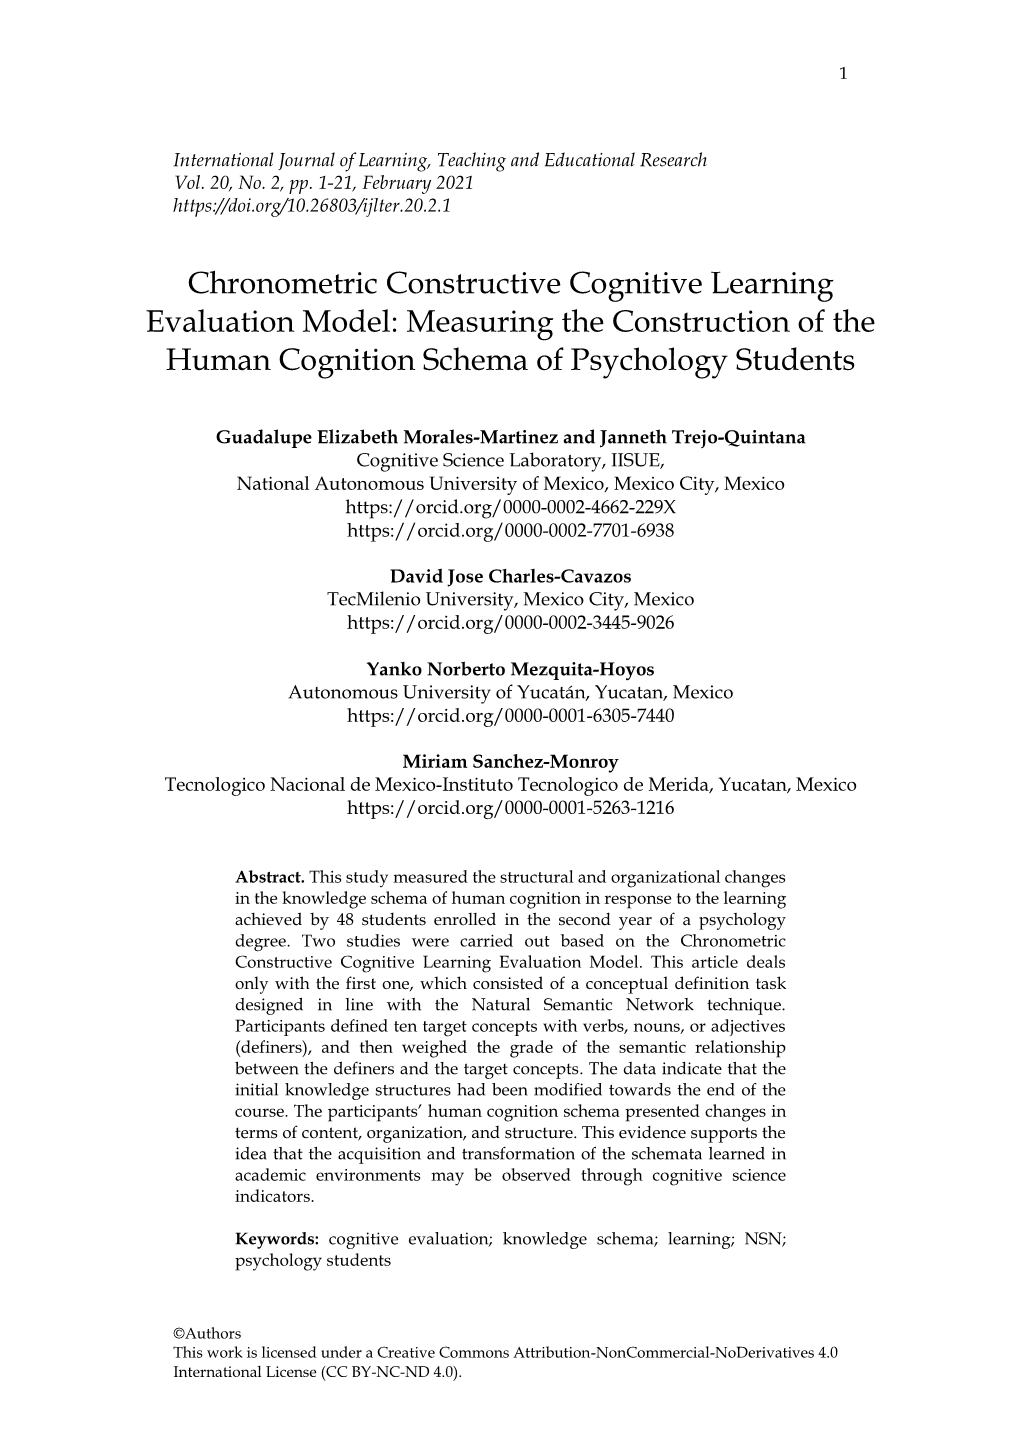 Measuring the Construction of the Human Cognition Schema of Psychology Students